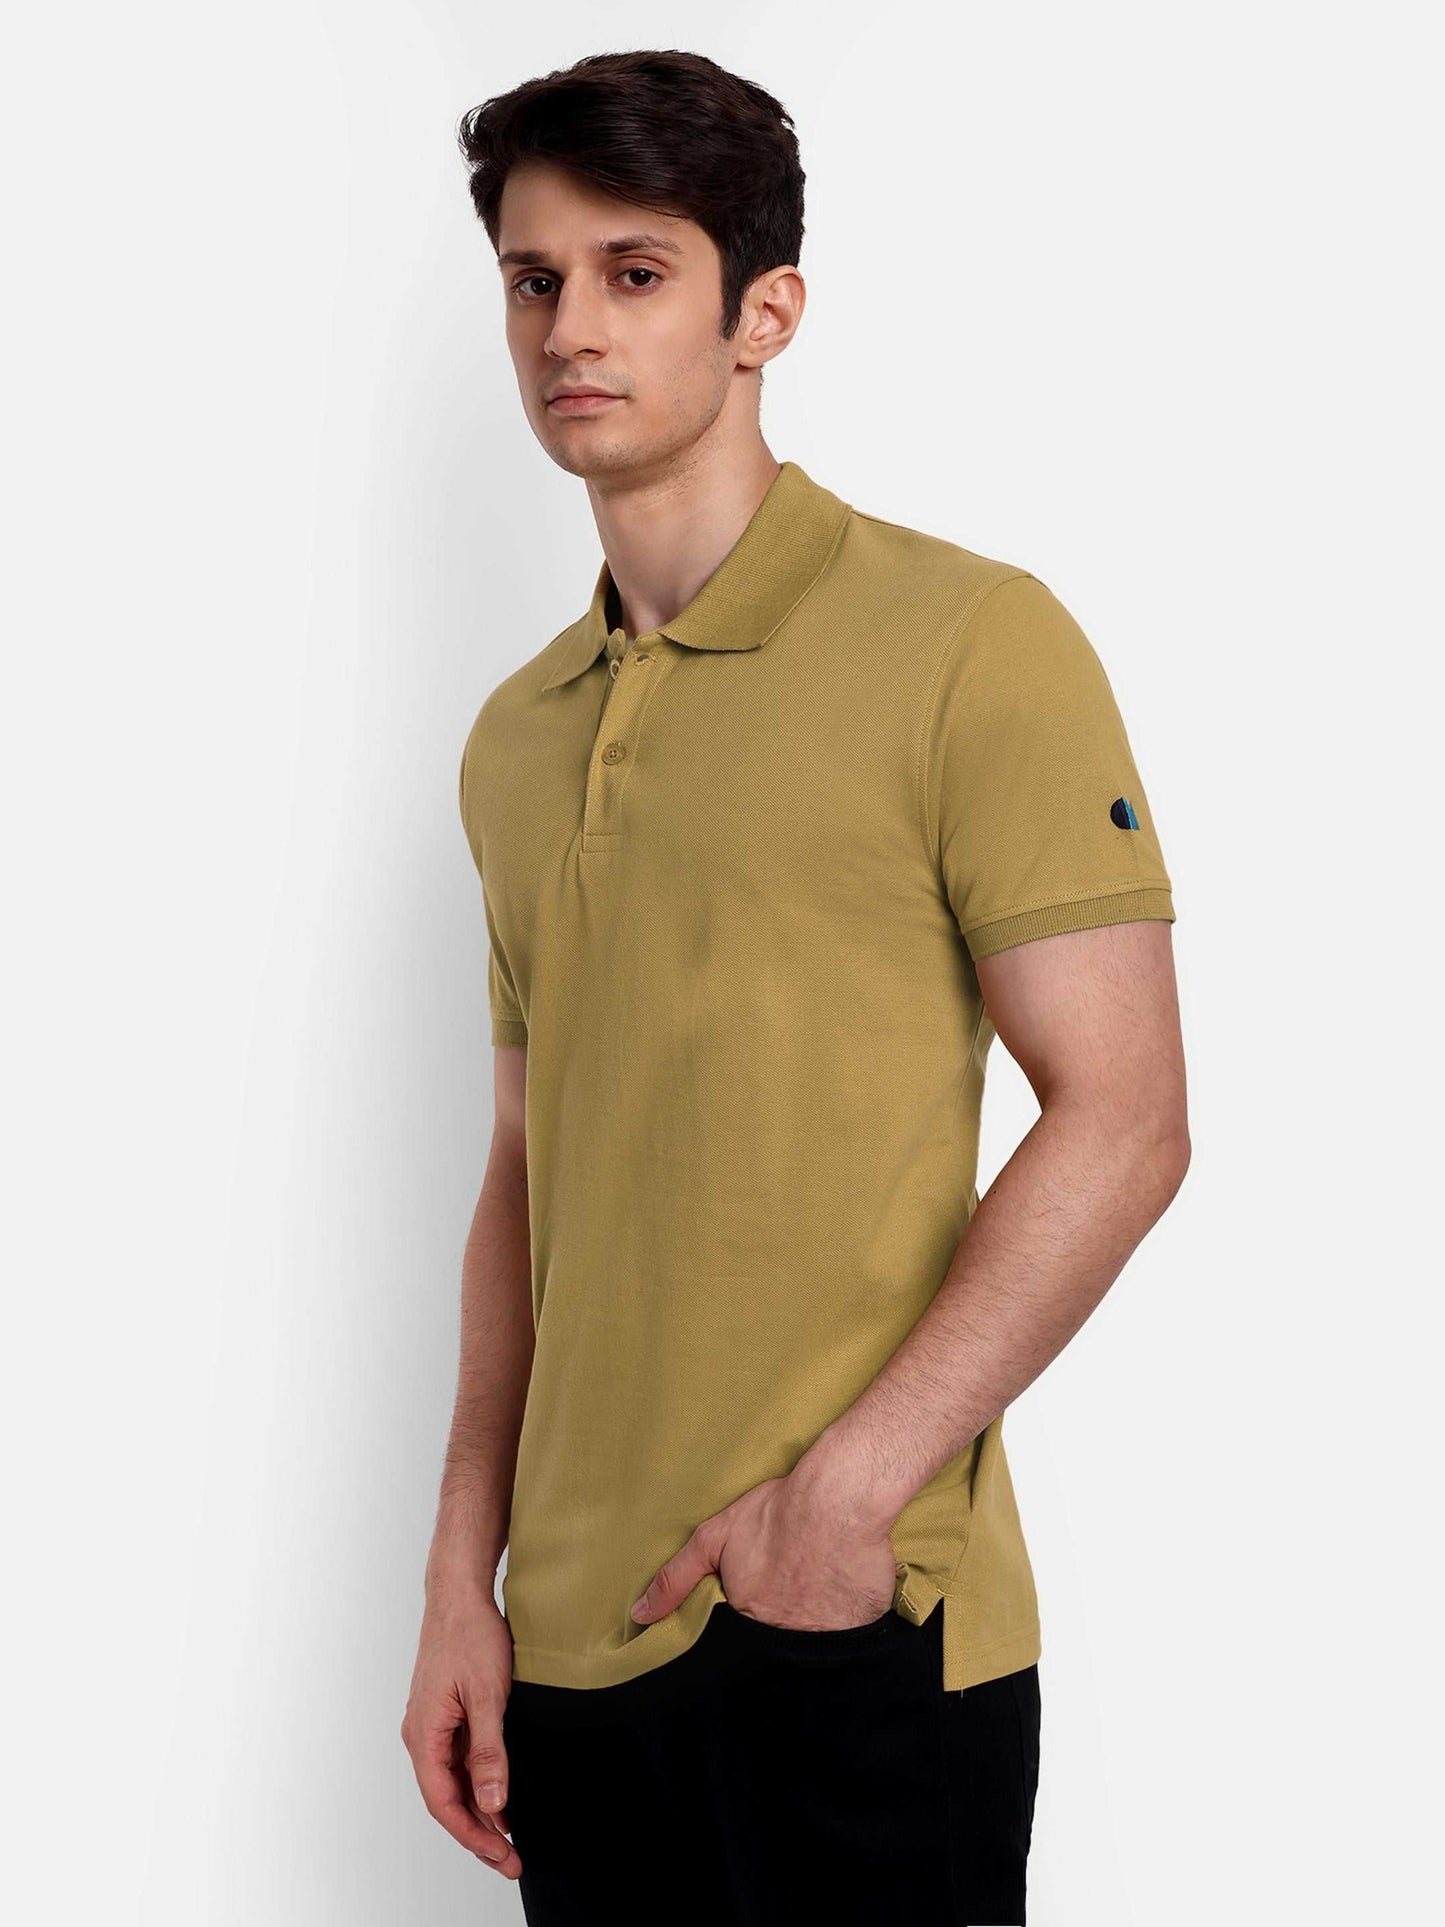 Best offers on polo t-shirts at comfimerchi